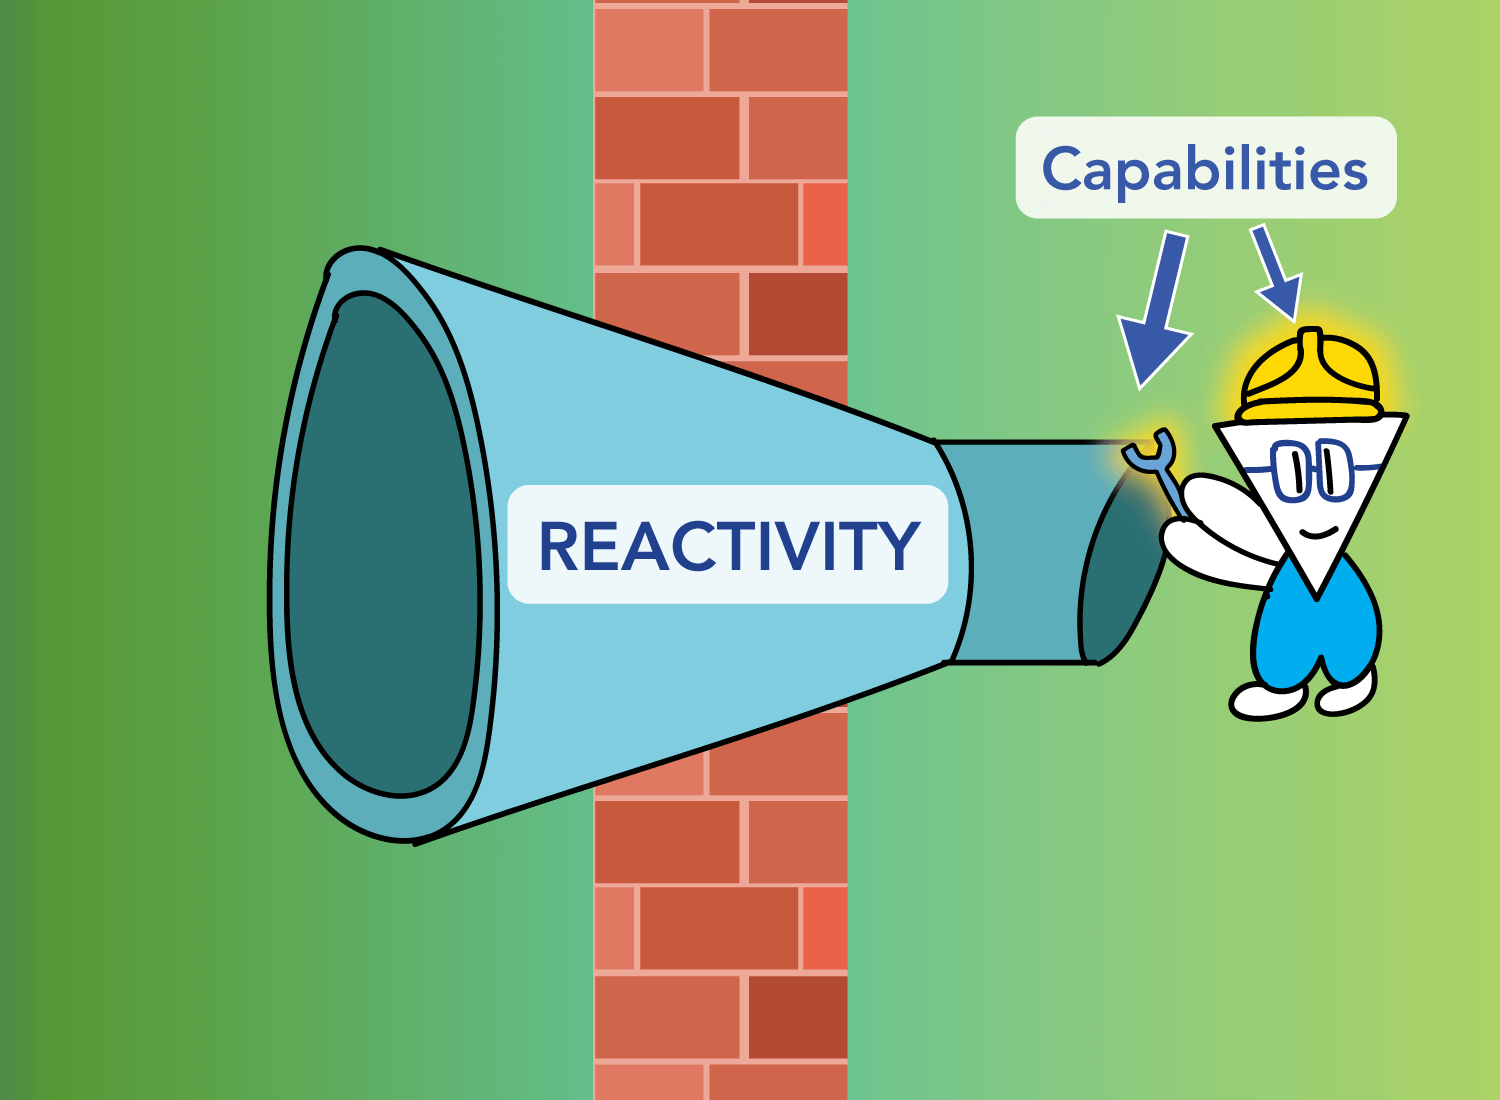 capabilities and the reactivity filter